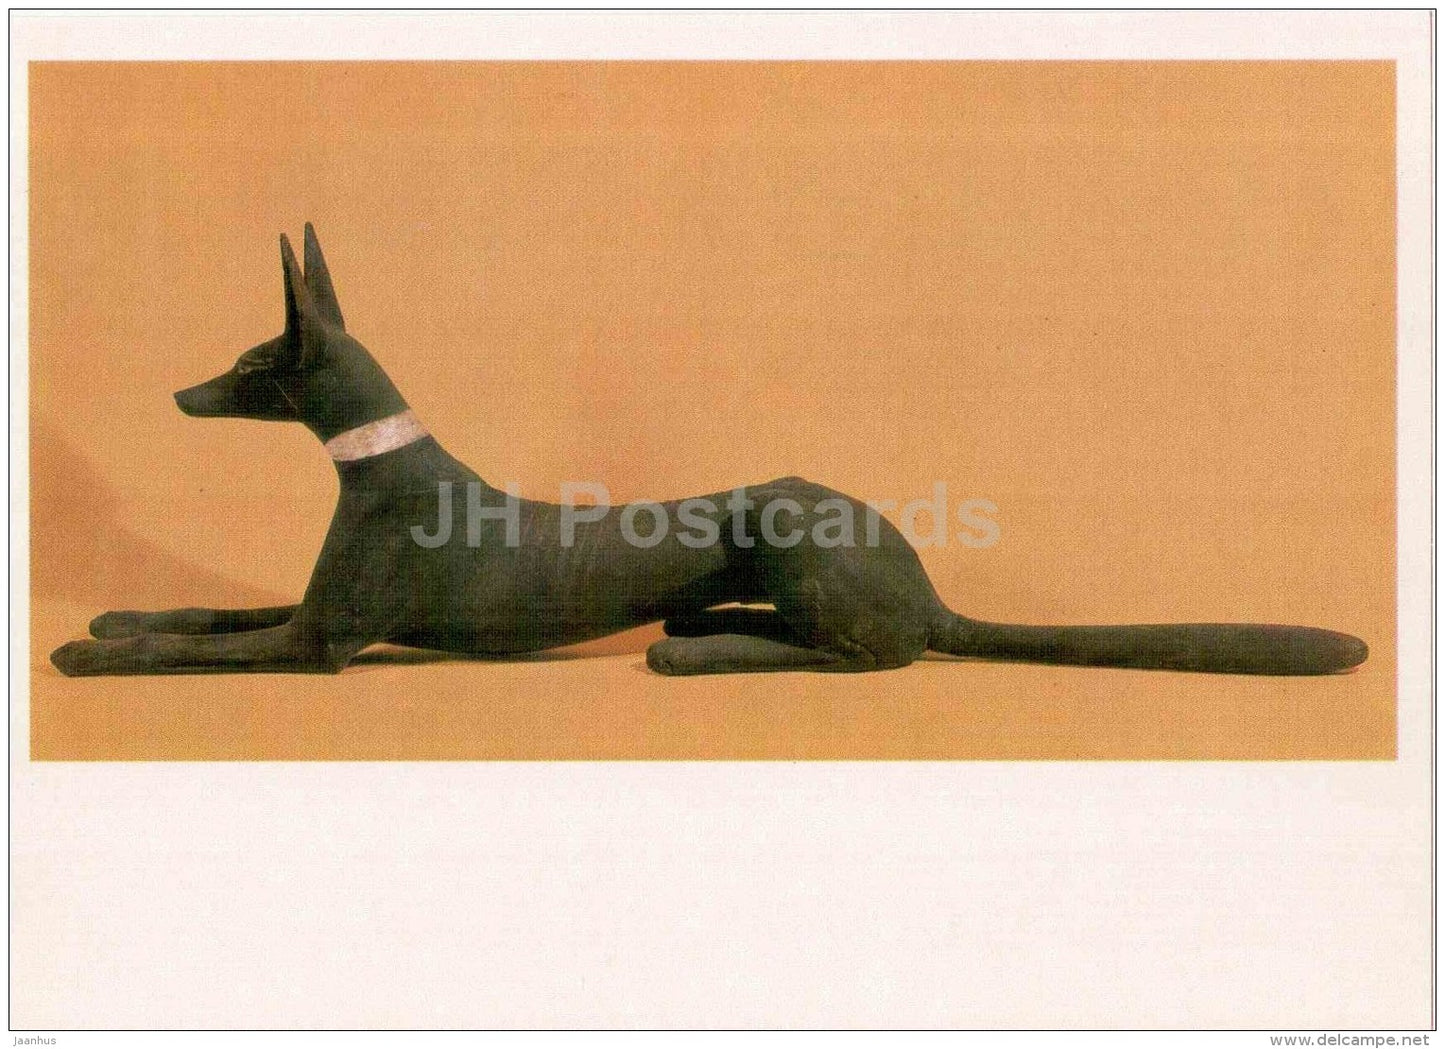 statue of the Jackal - Art of Ancient Egypt - 1986 - Russia USSR - unused - JH Postcards